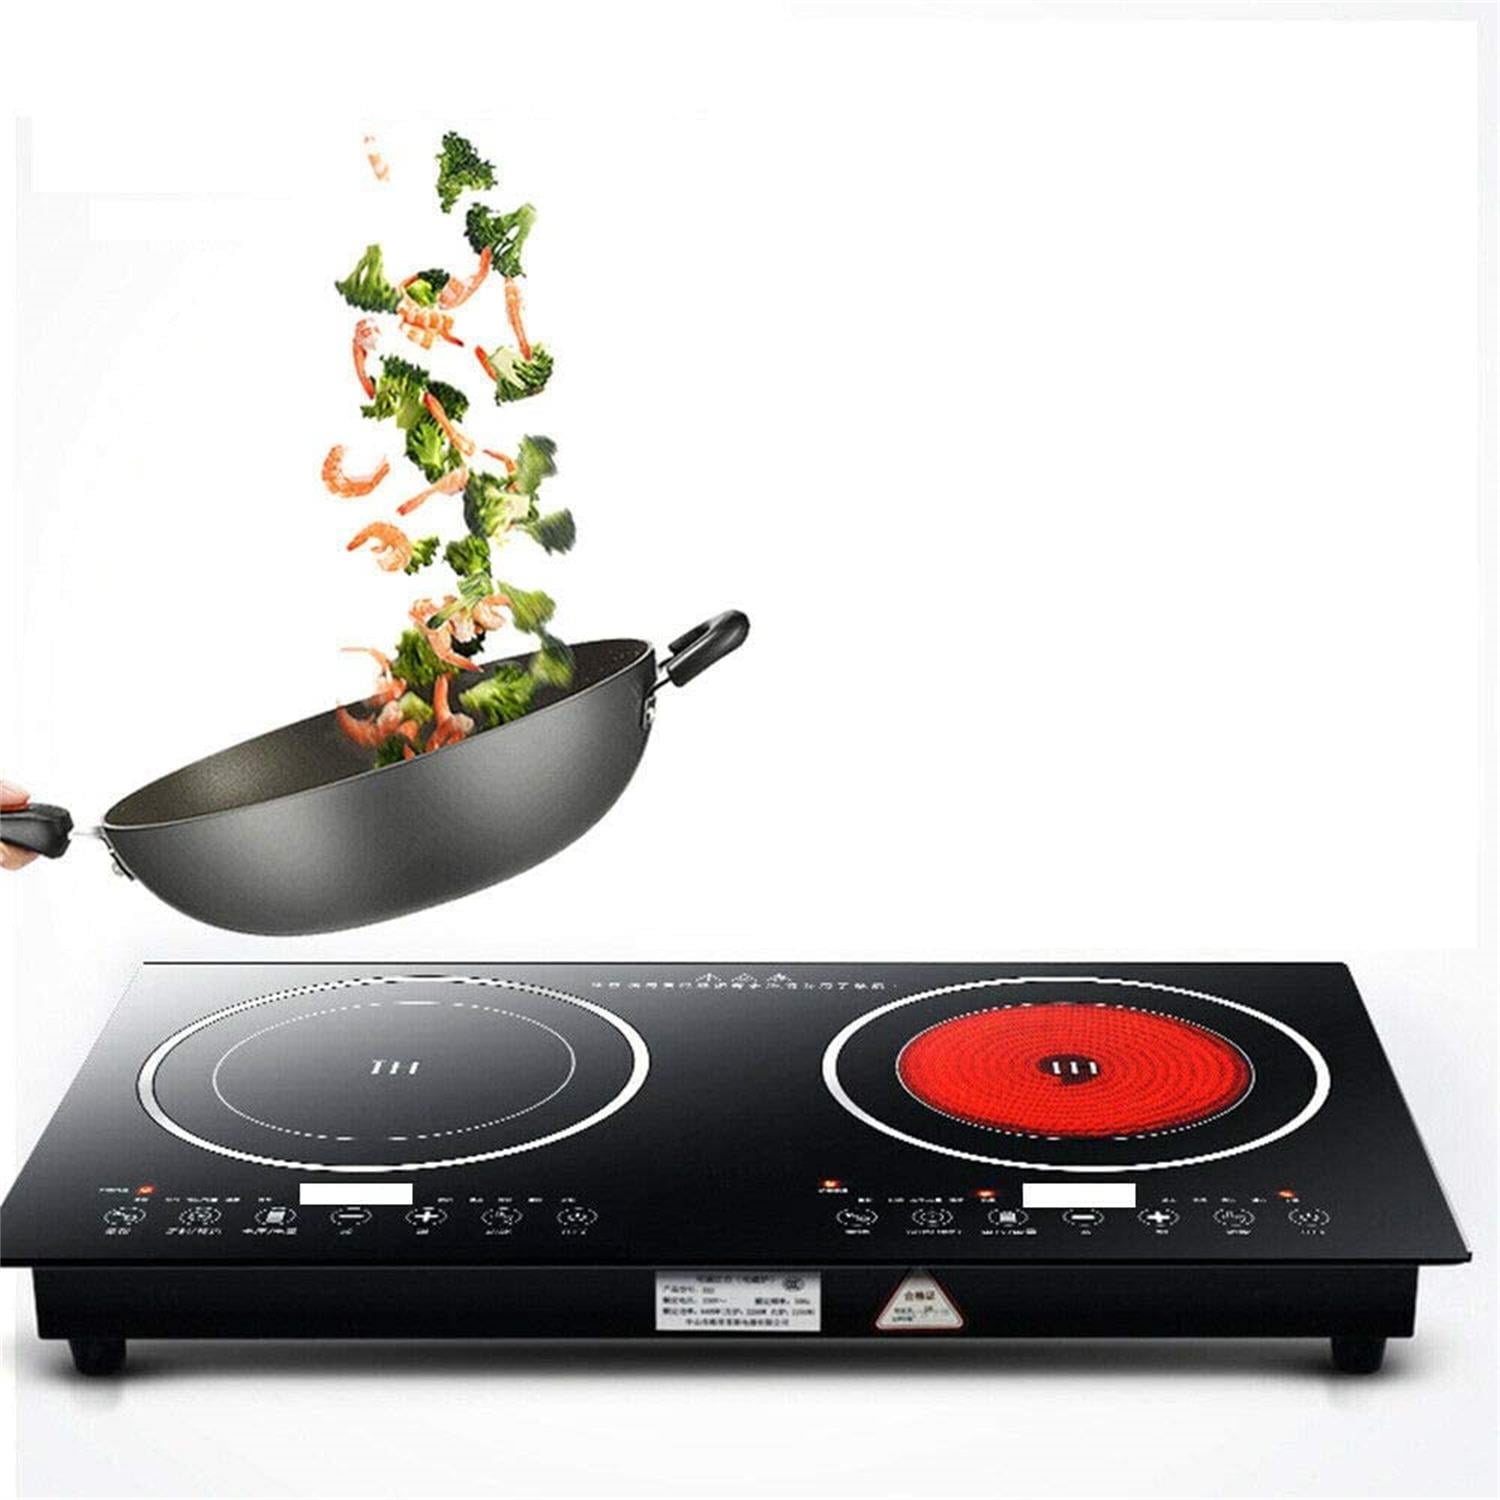 Portable 2000W Countertop Electric Stove Dual Burner Cast Iron Hot Plate  Cooktop